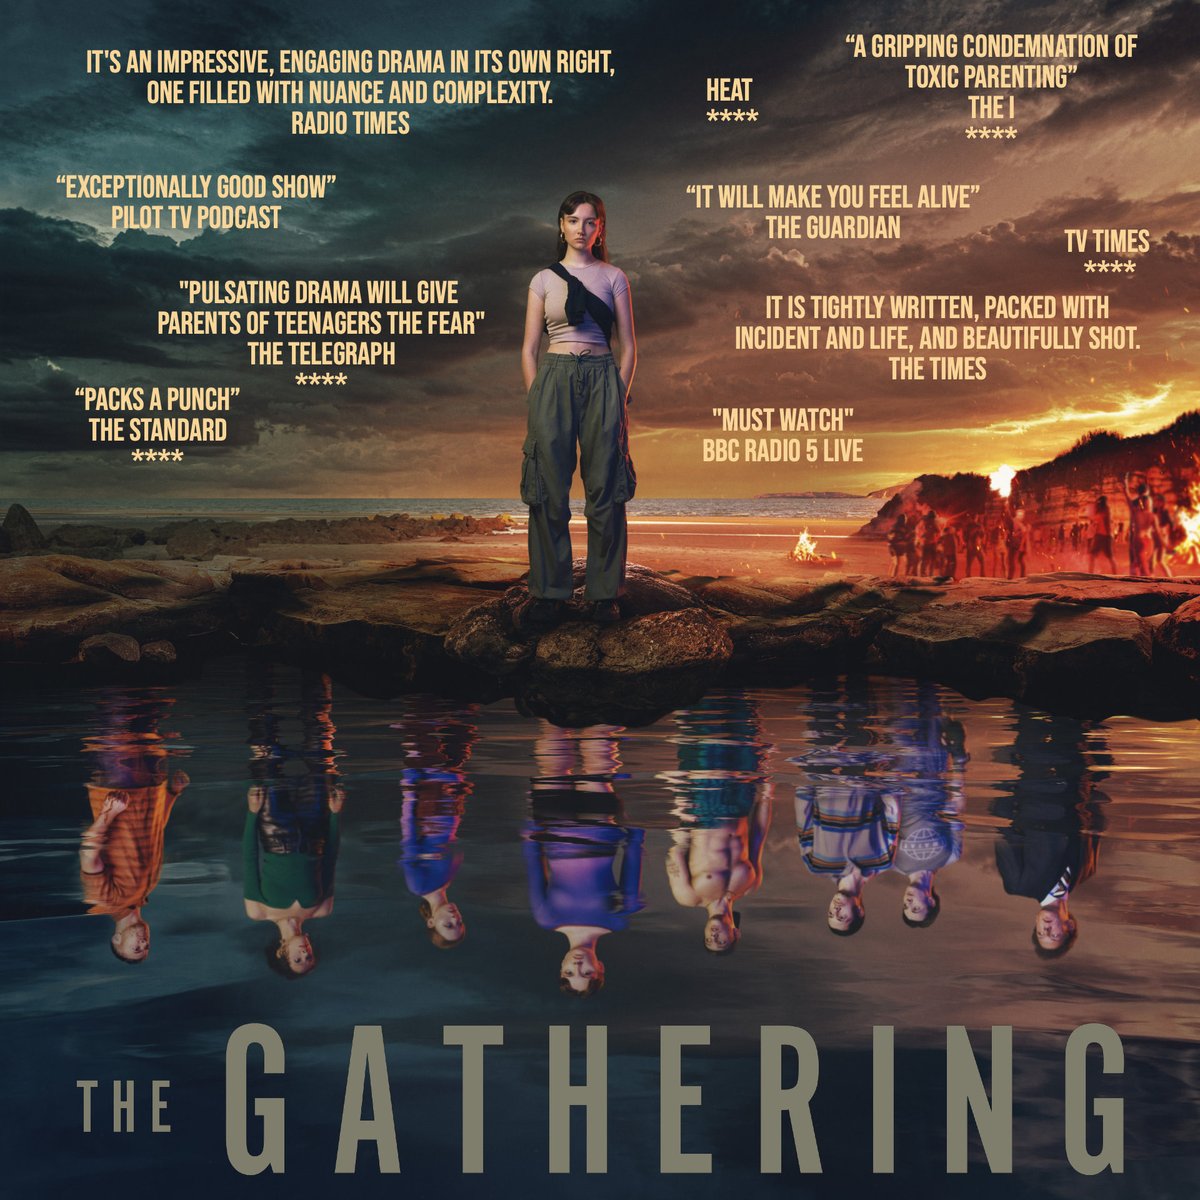 ⁩Given the barriers that face women and the working class in the screen industry, it’s very timely that Writer/Director Helen Walsh has put class privilege front and centre in @worldprods #TheGathering ⁦⁩on @channel4 We need Rate parity, Flexible working & Childcare ✊🏻